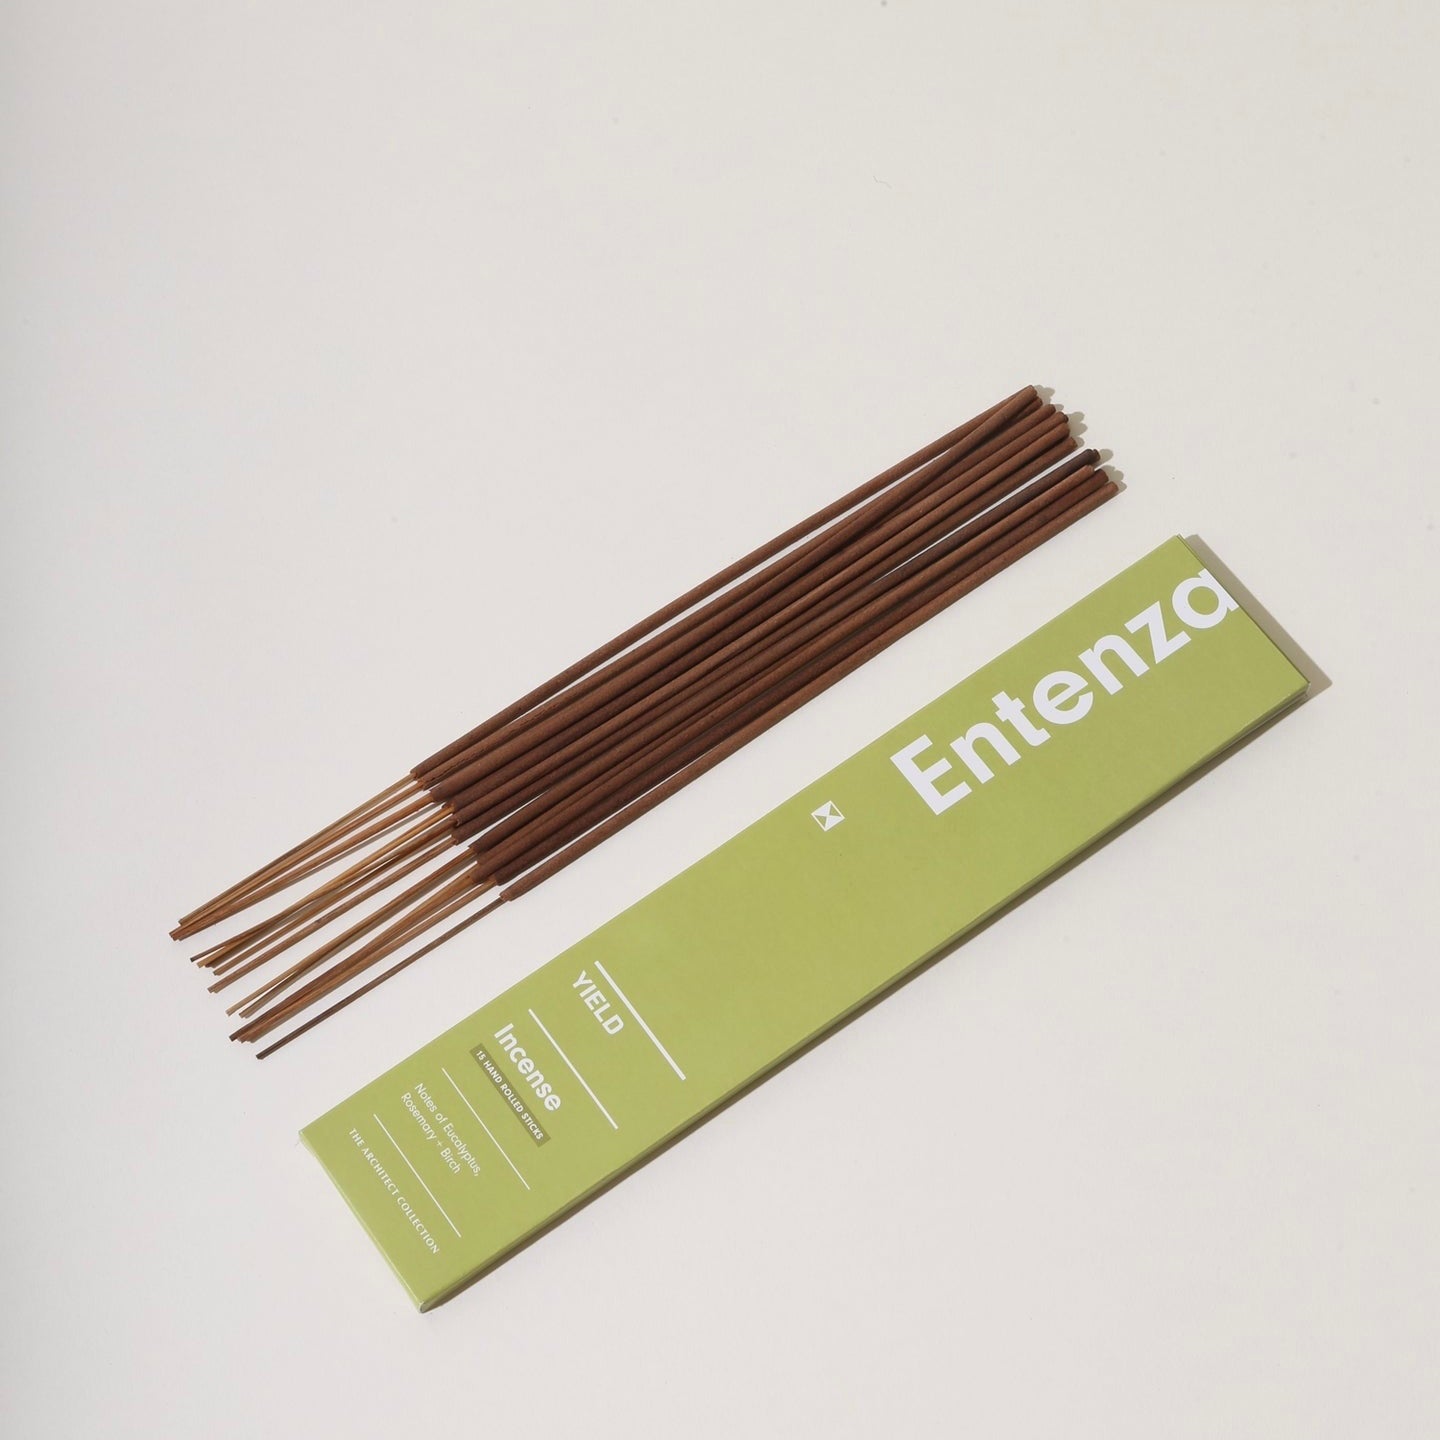 Architect Series Incense by Yield Design Co. Incense Yield Design Co. Entenza  